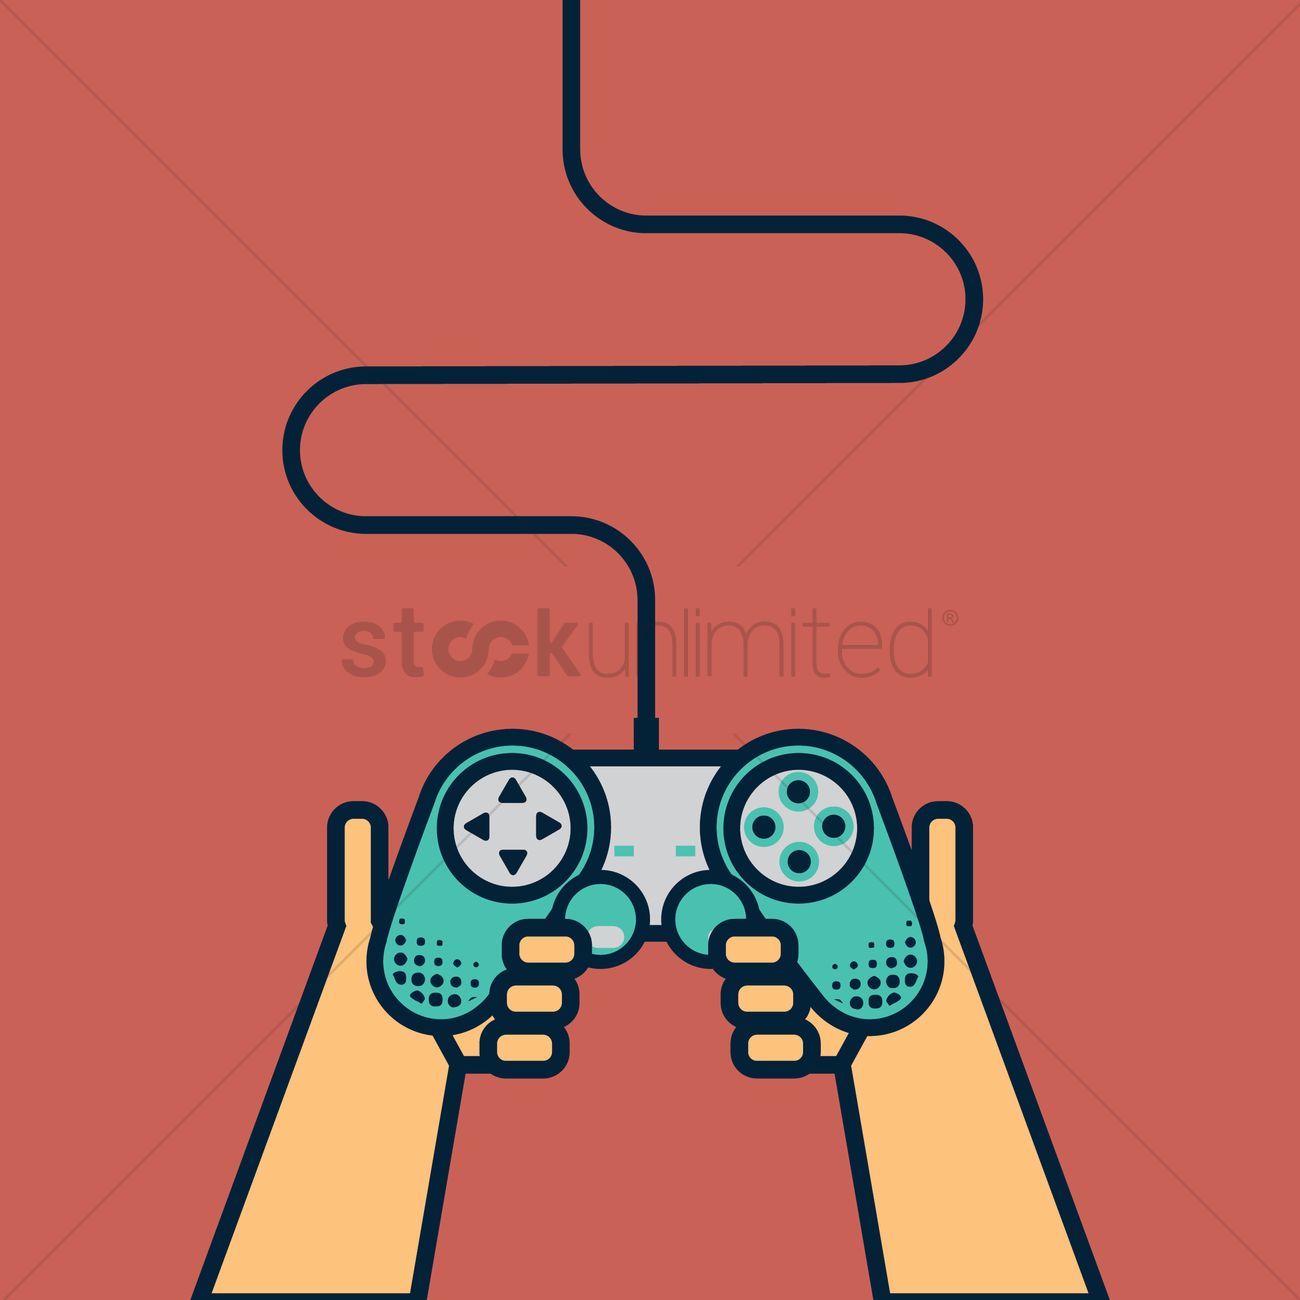 Hands holding game controller Vector Image